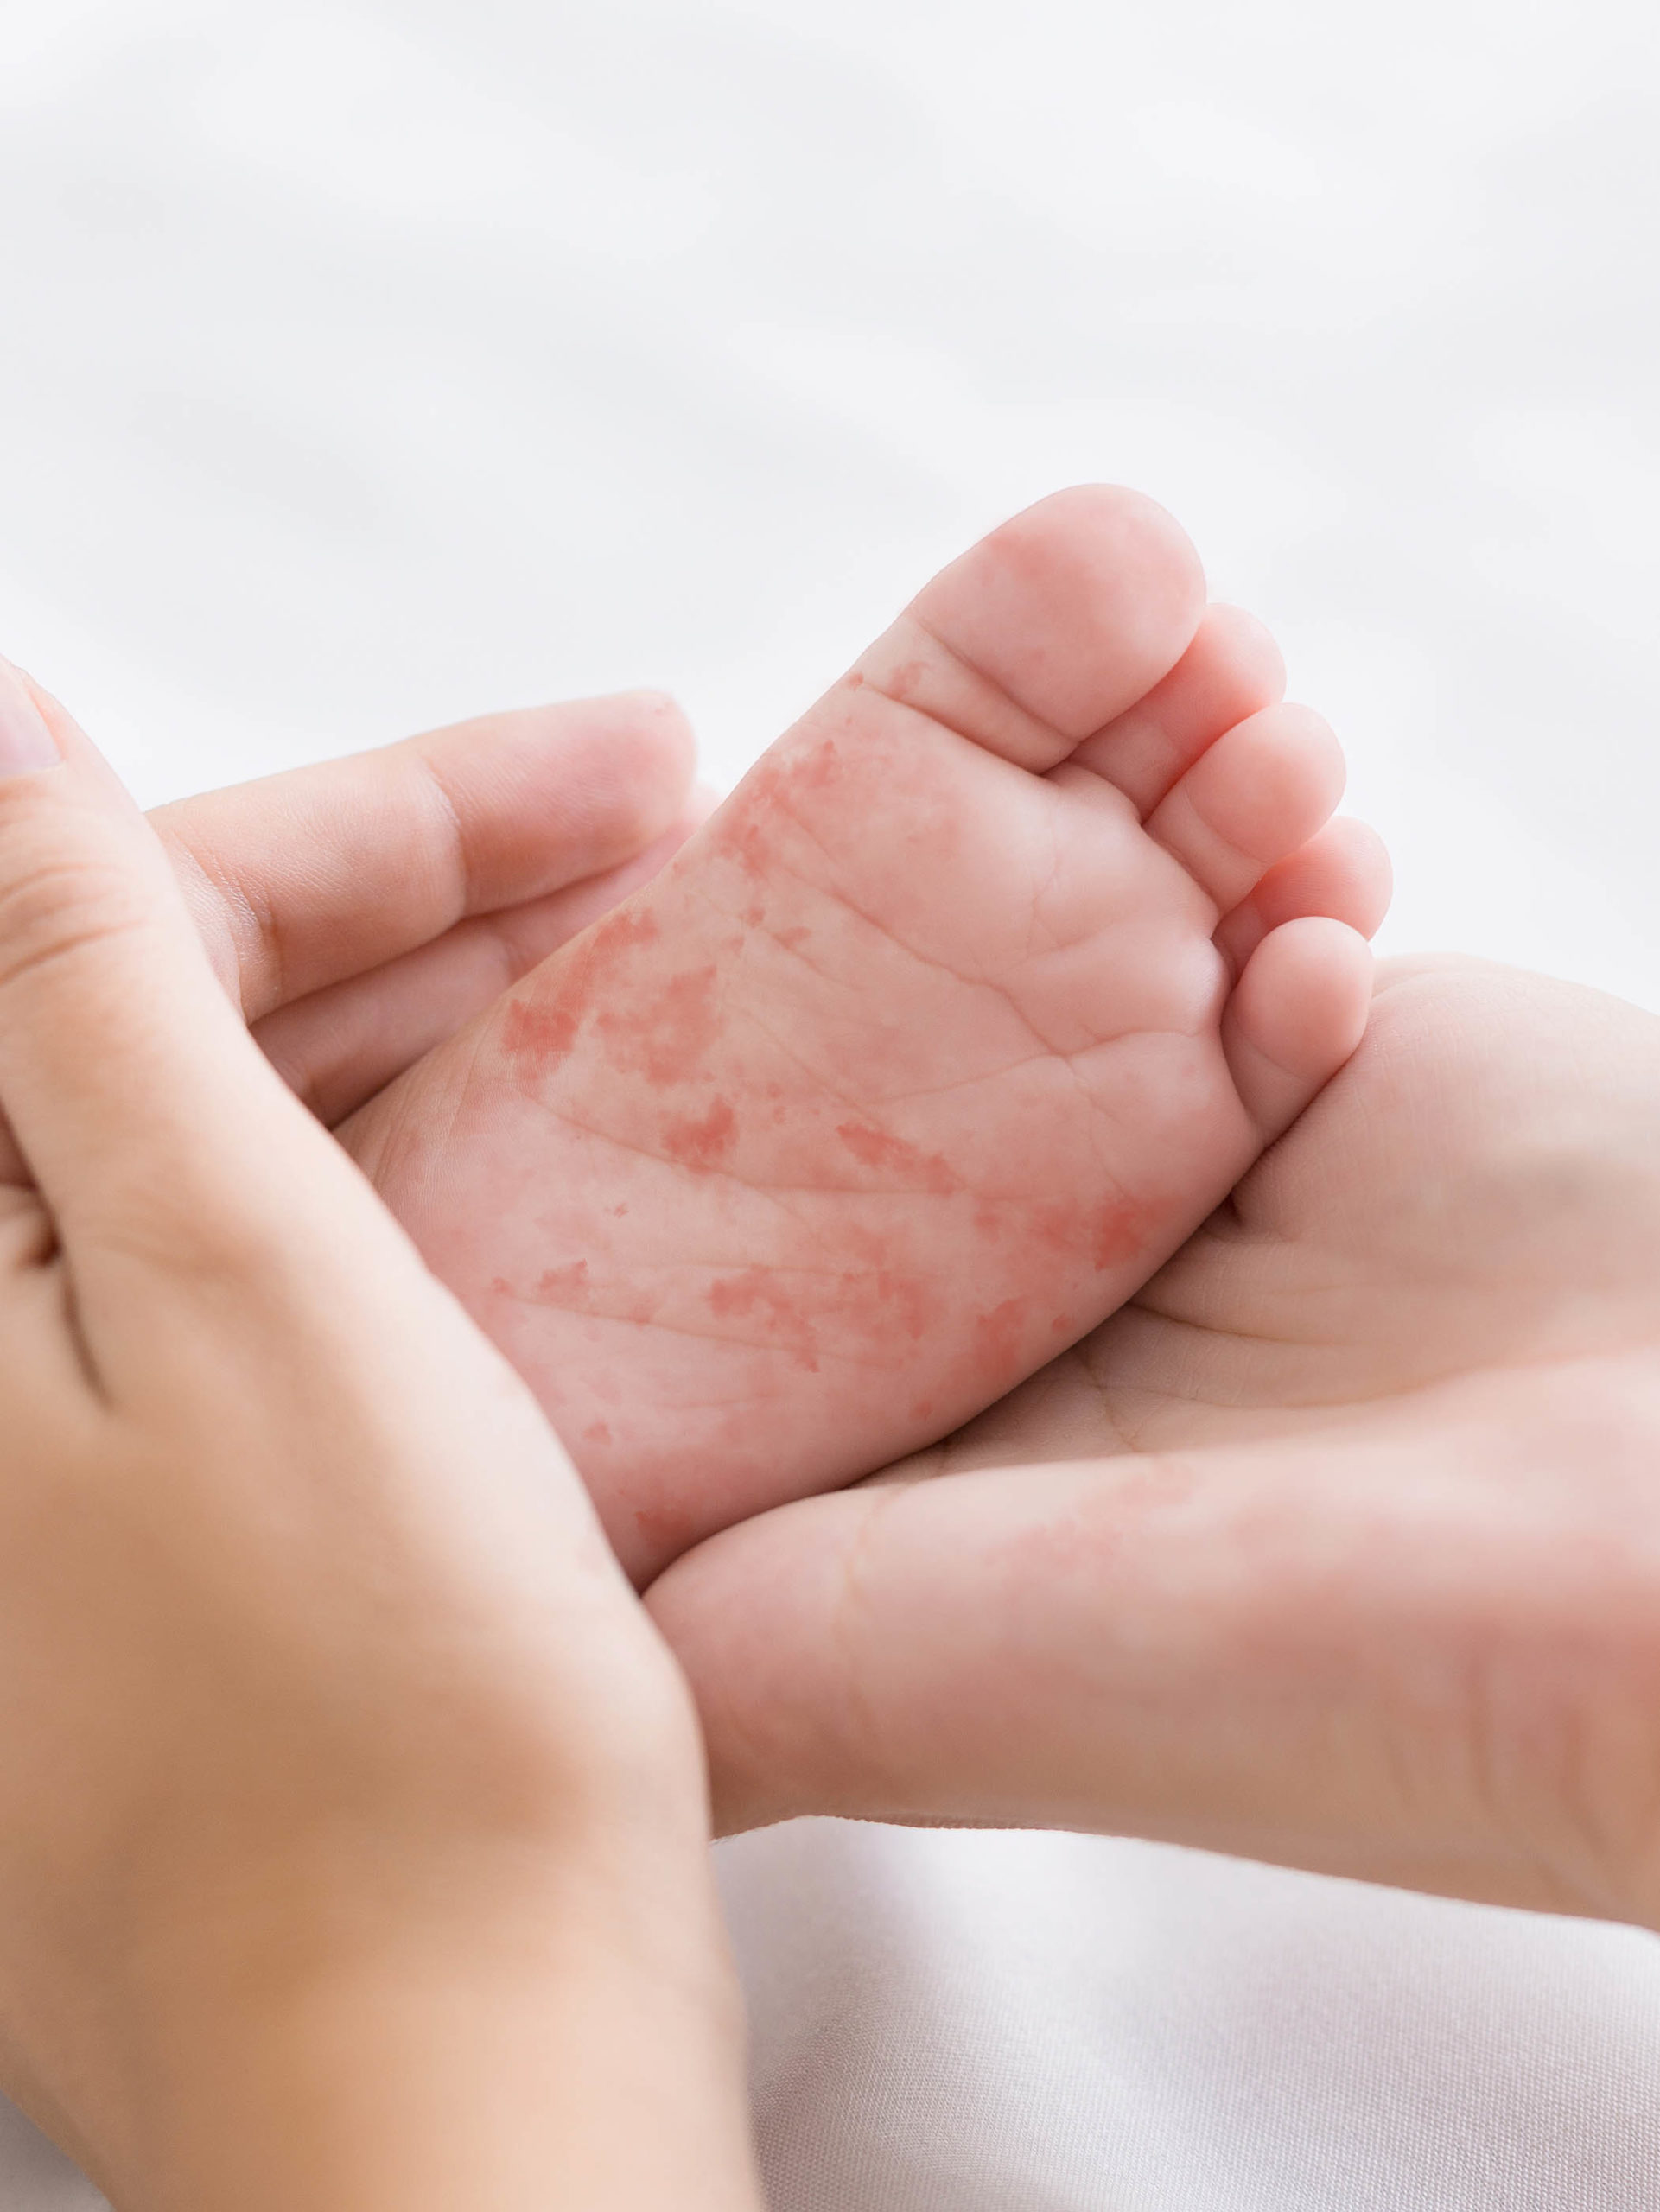 Measles outbreaks: What parents need to know